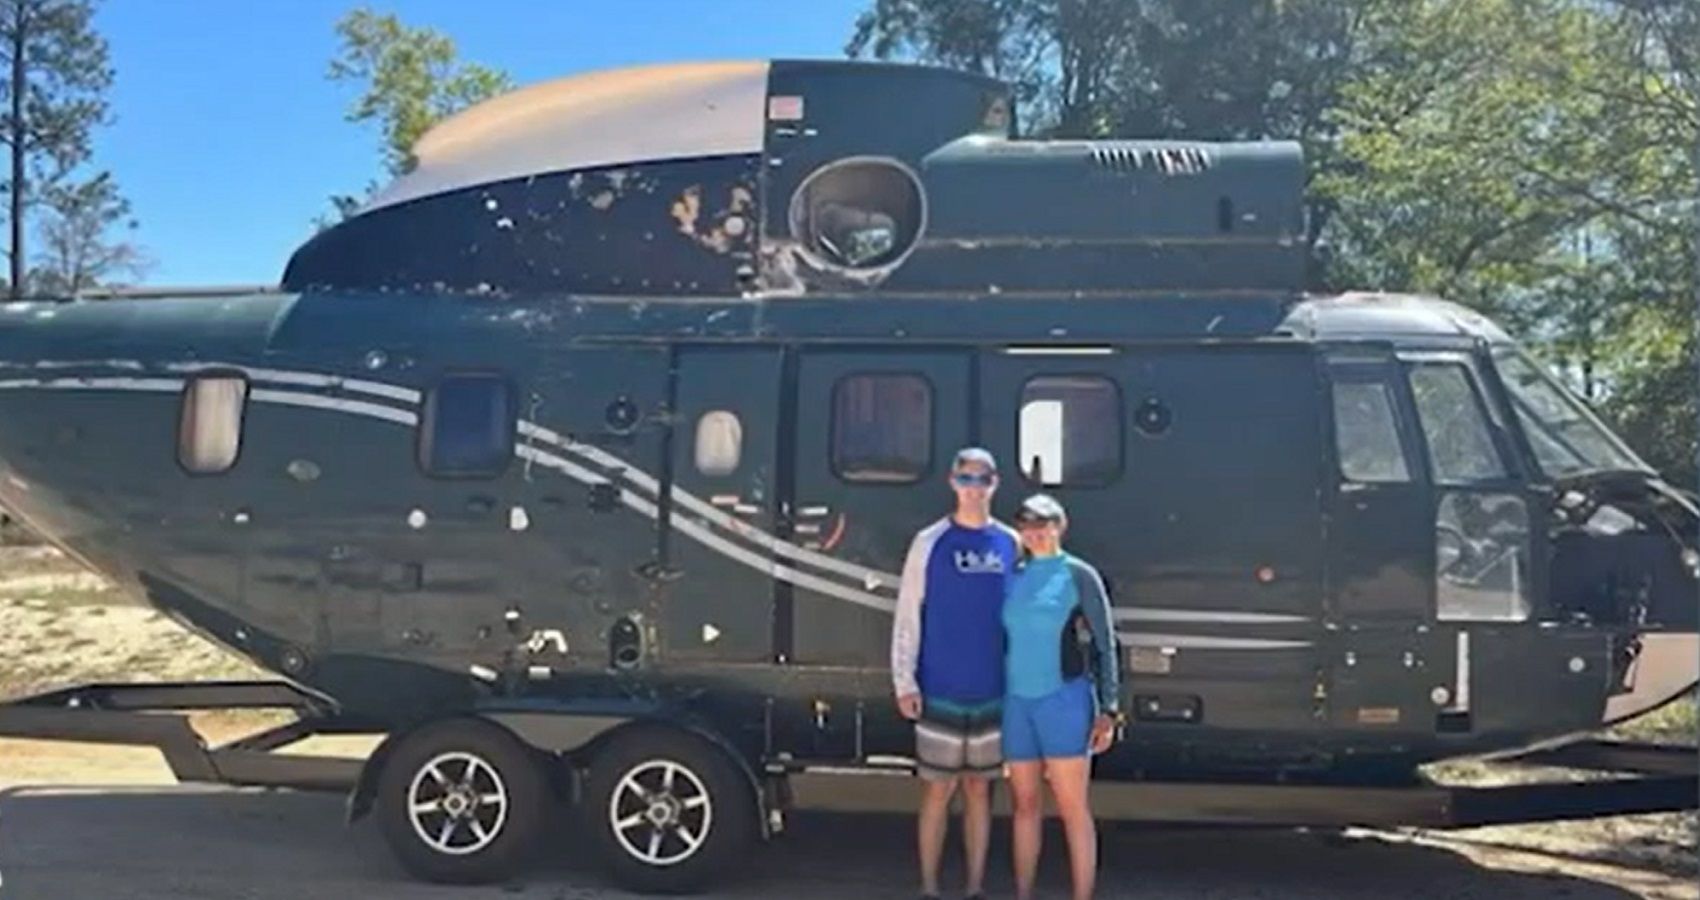 This Military Helicopter RV Camper Conversion Is Simply Unbelievable